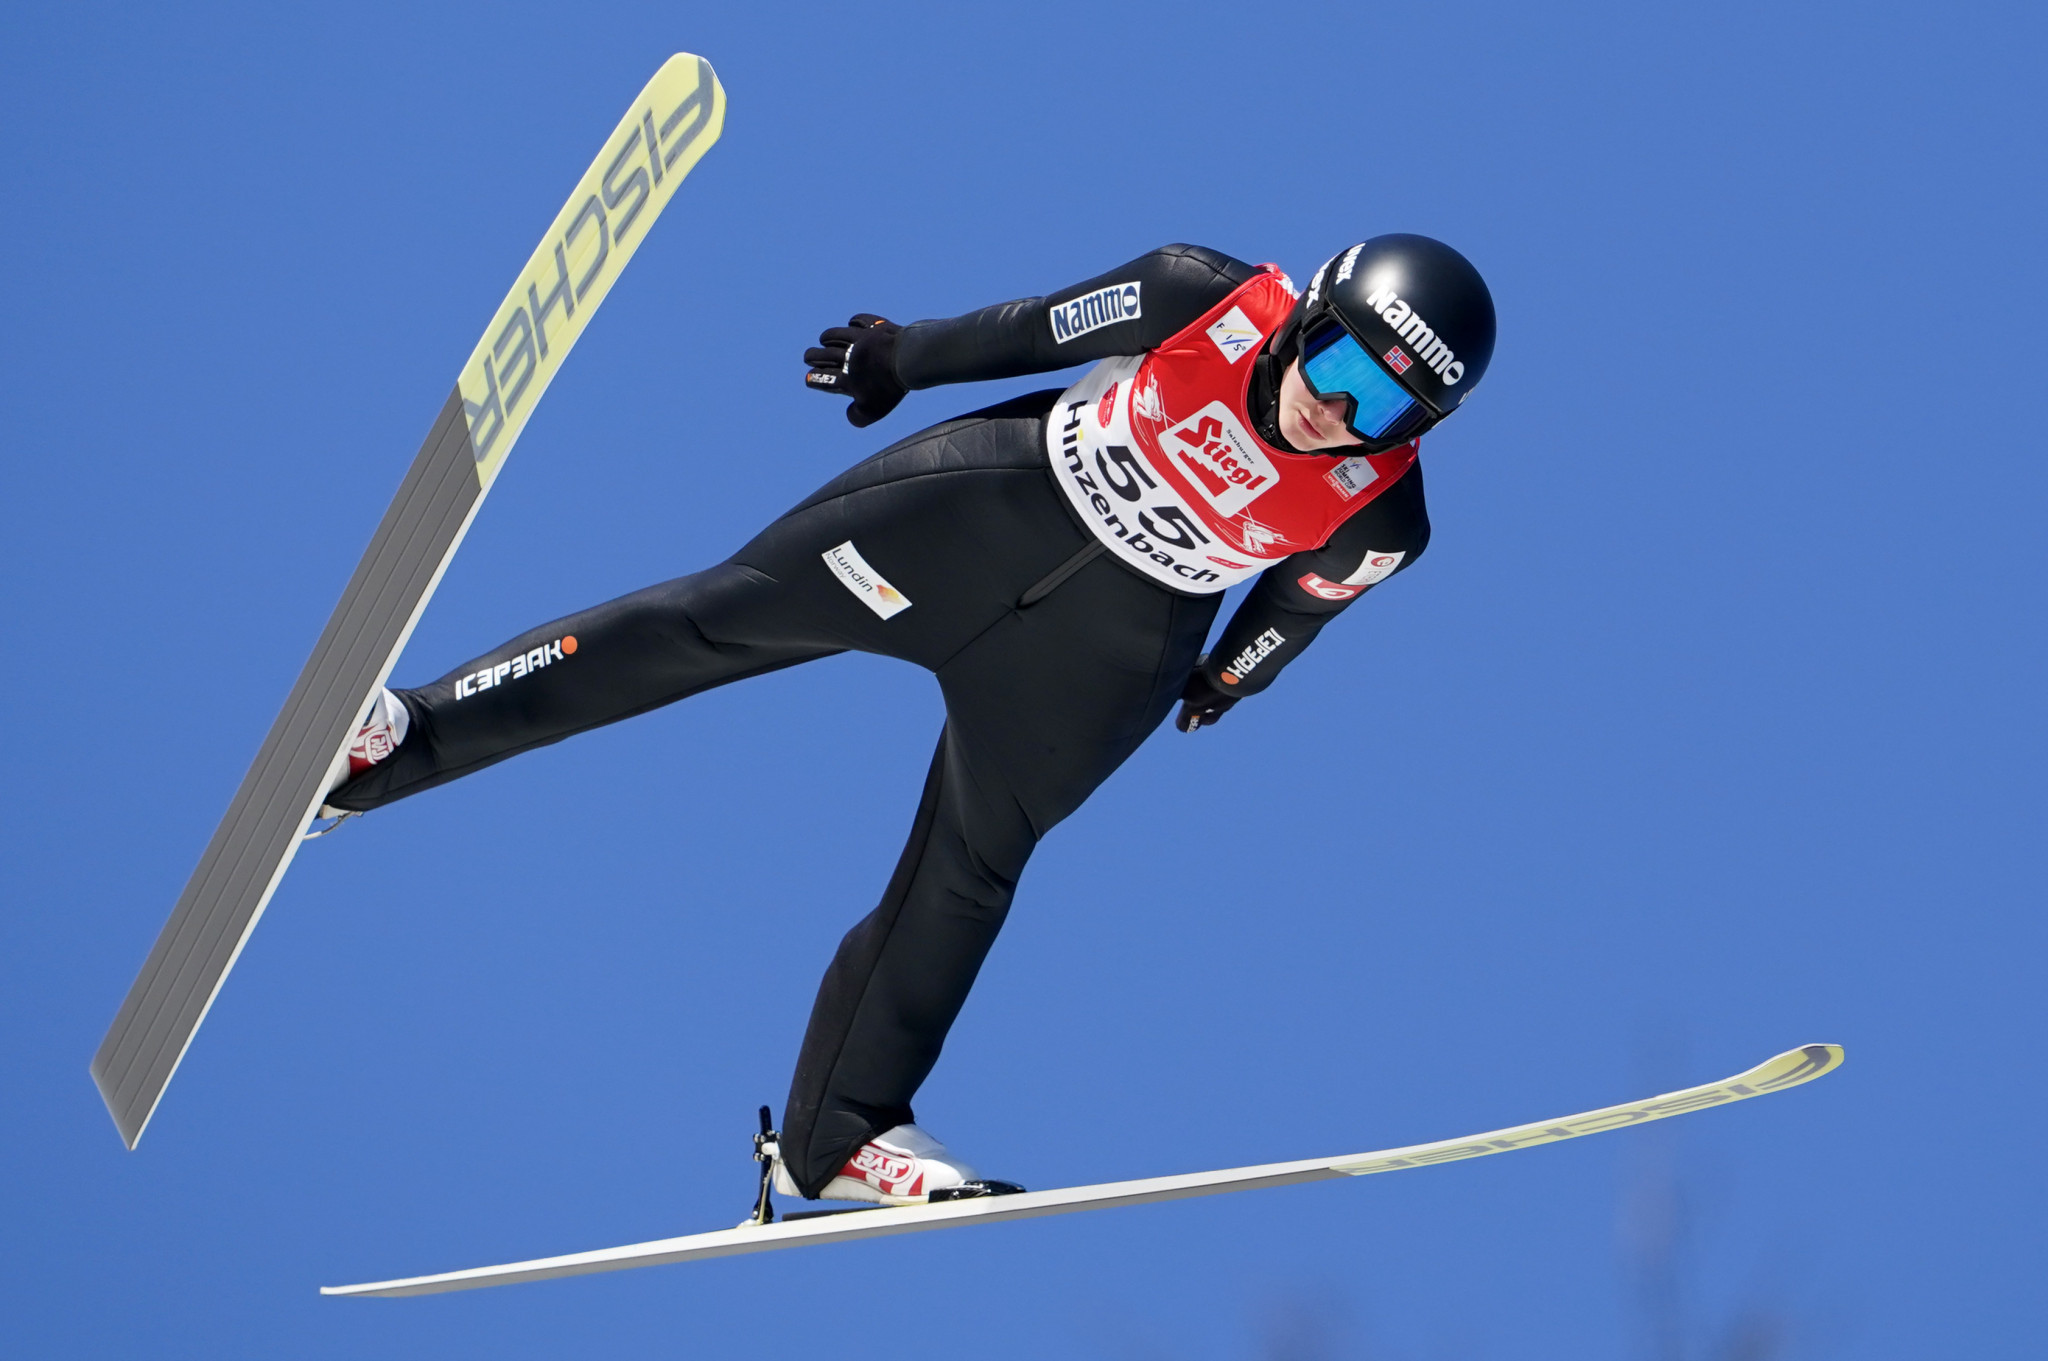 Opseth tops qualifying as women's FIS Ski Jumping World Cup resumes in Ljubno